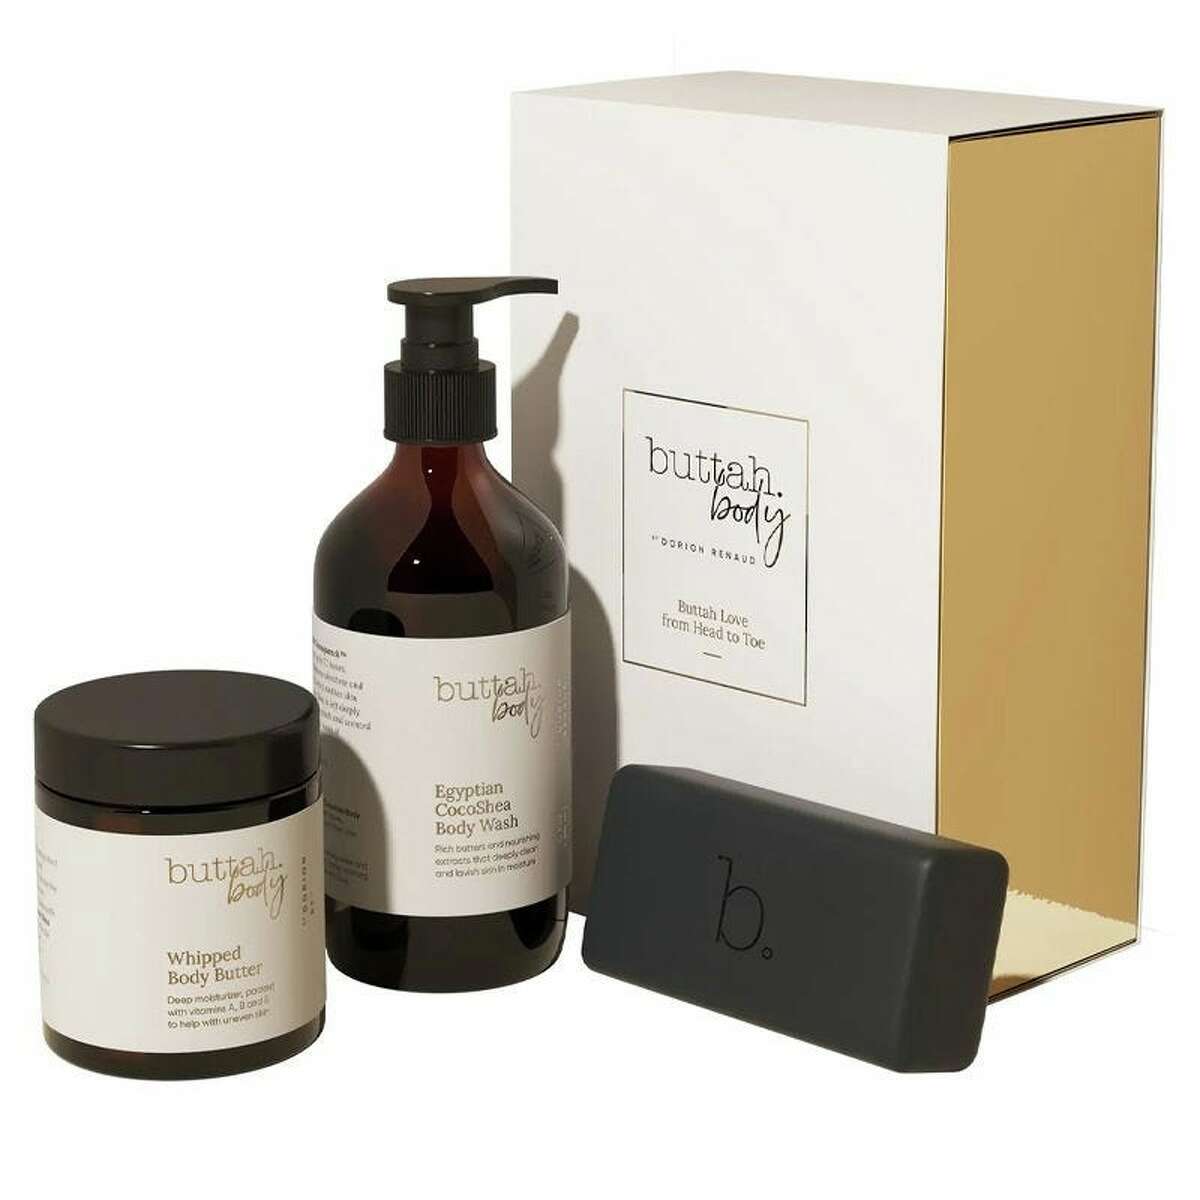 BUTTAH SKIN Buttah Love from Head to Toe Care Set: $69.99 Shop Now He can’t smell like a teen spirit when he’s going on dates now. Get him a set that's understated enough that he'll use it daily.